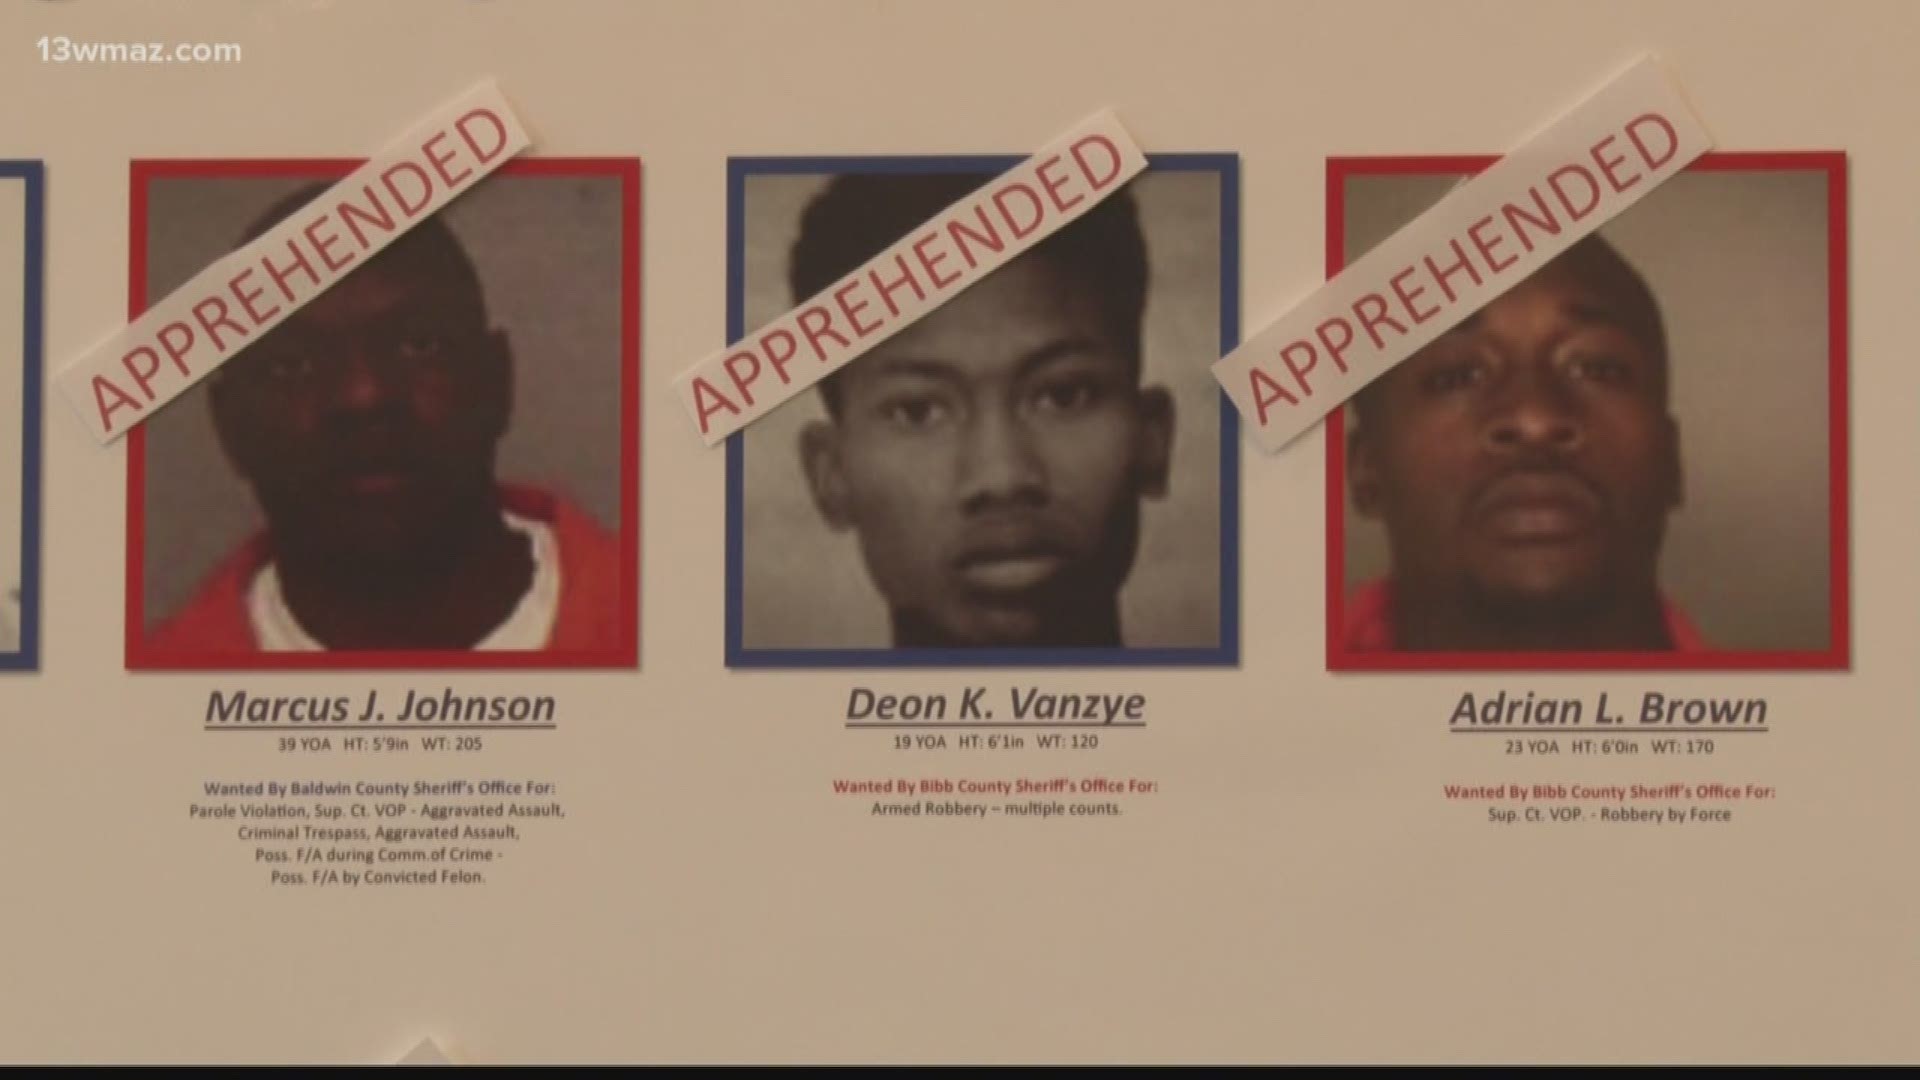 Macon Regional Crimestoppers says it's made progress in getting many of Central Georgia's Most Wanted off the streets. Last month, Crimestoppers posted a Top 15 list of known gang members or violent felons.